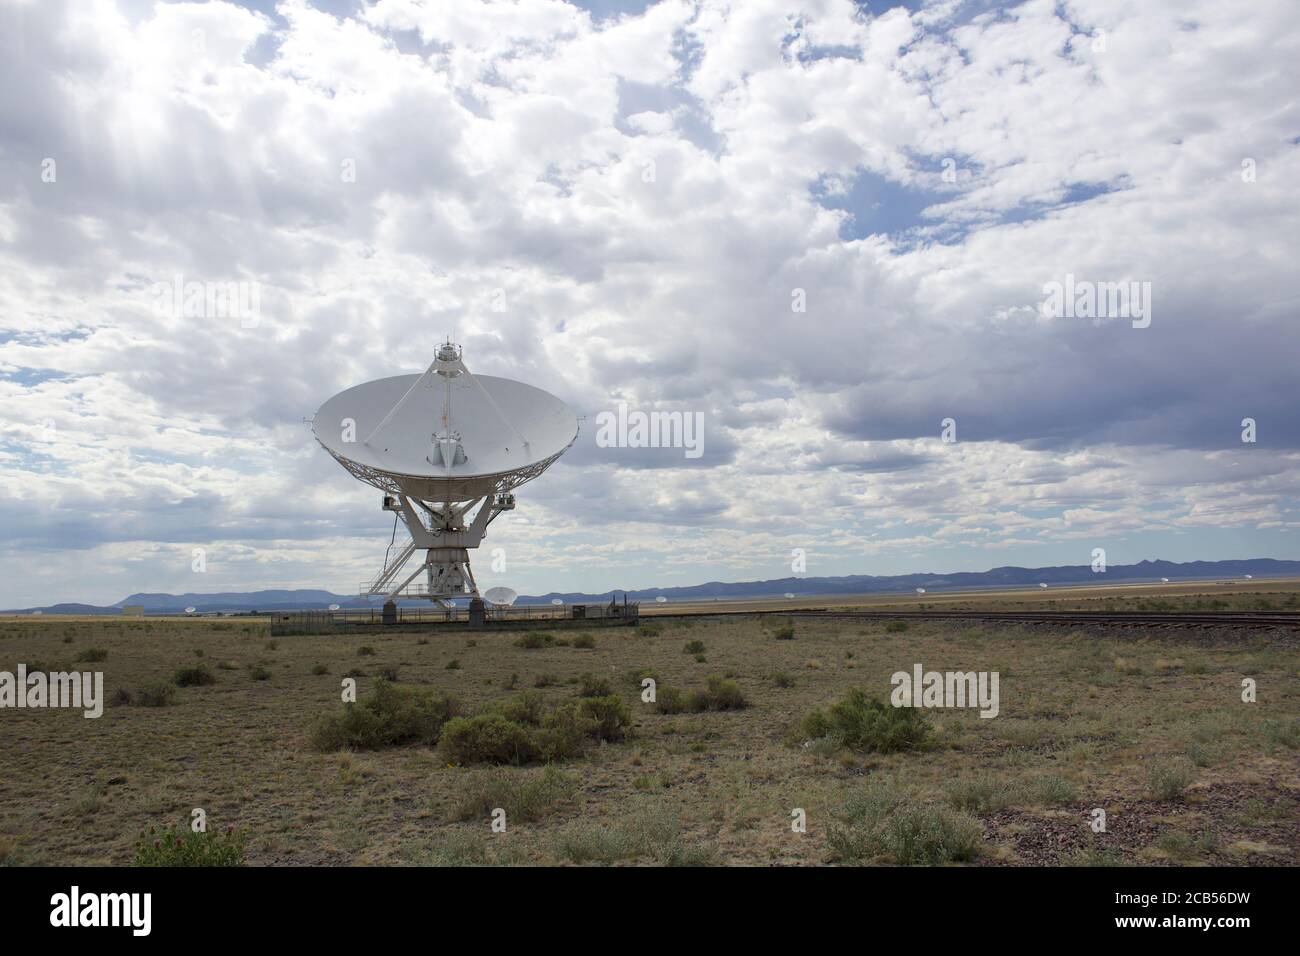 Giant radio telescope observing the universe at the Very Large Array, New Mexico Stock Photo